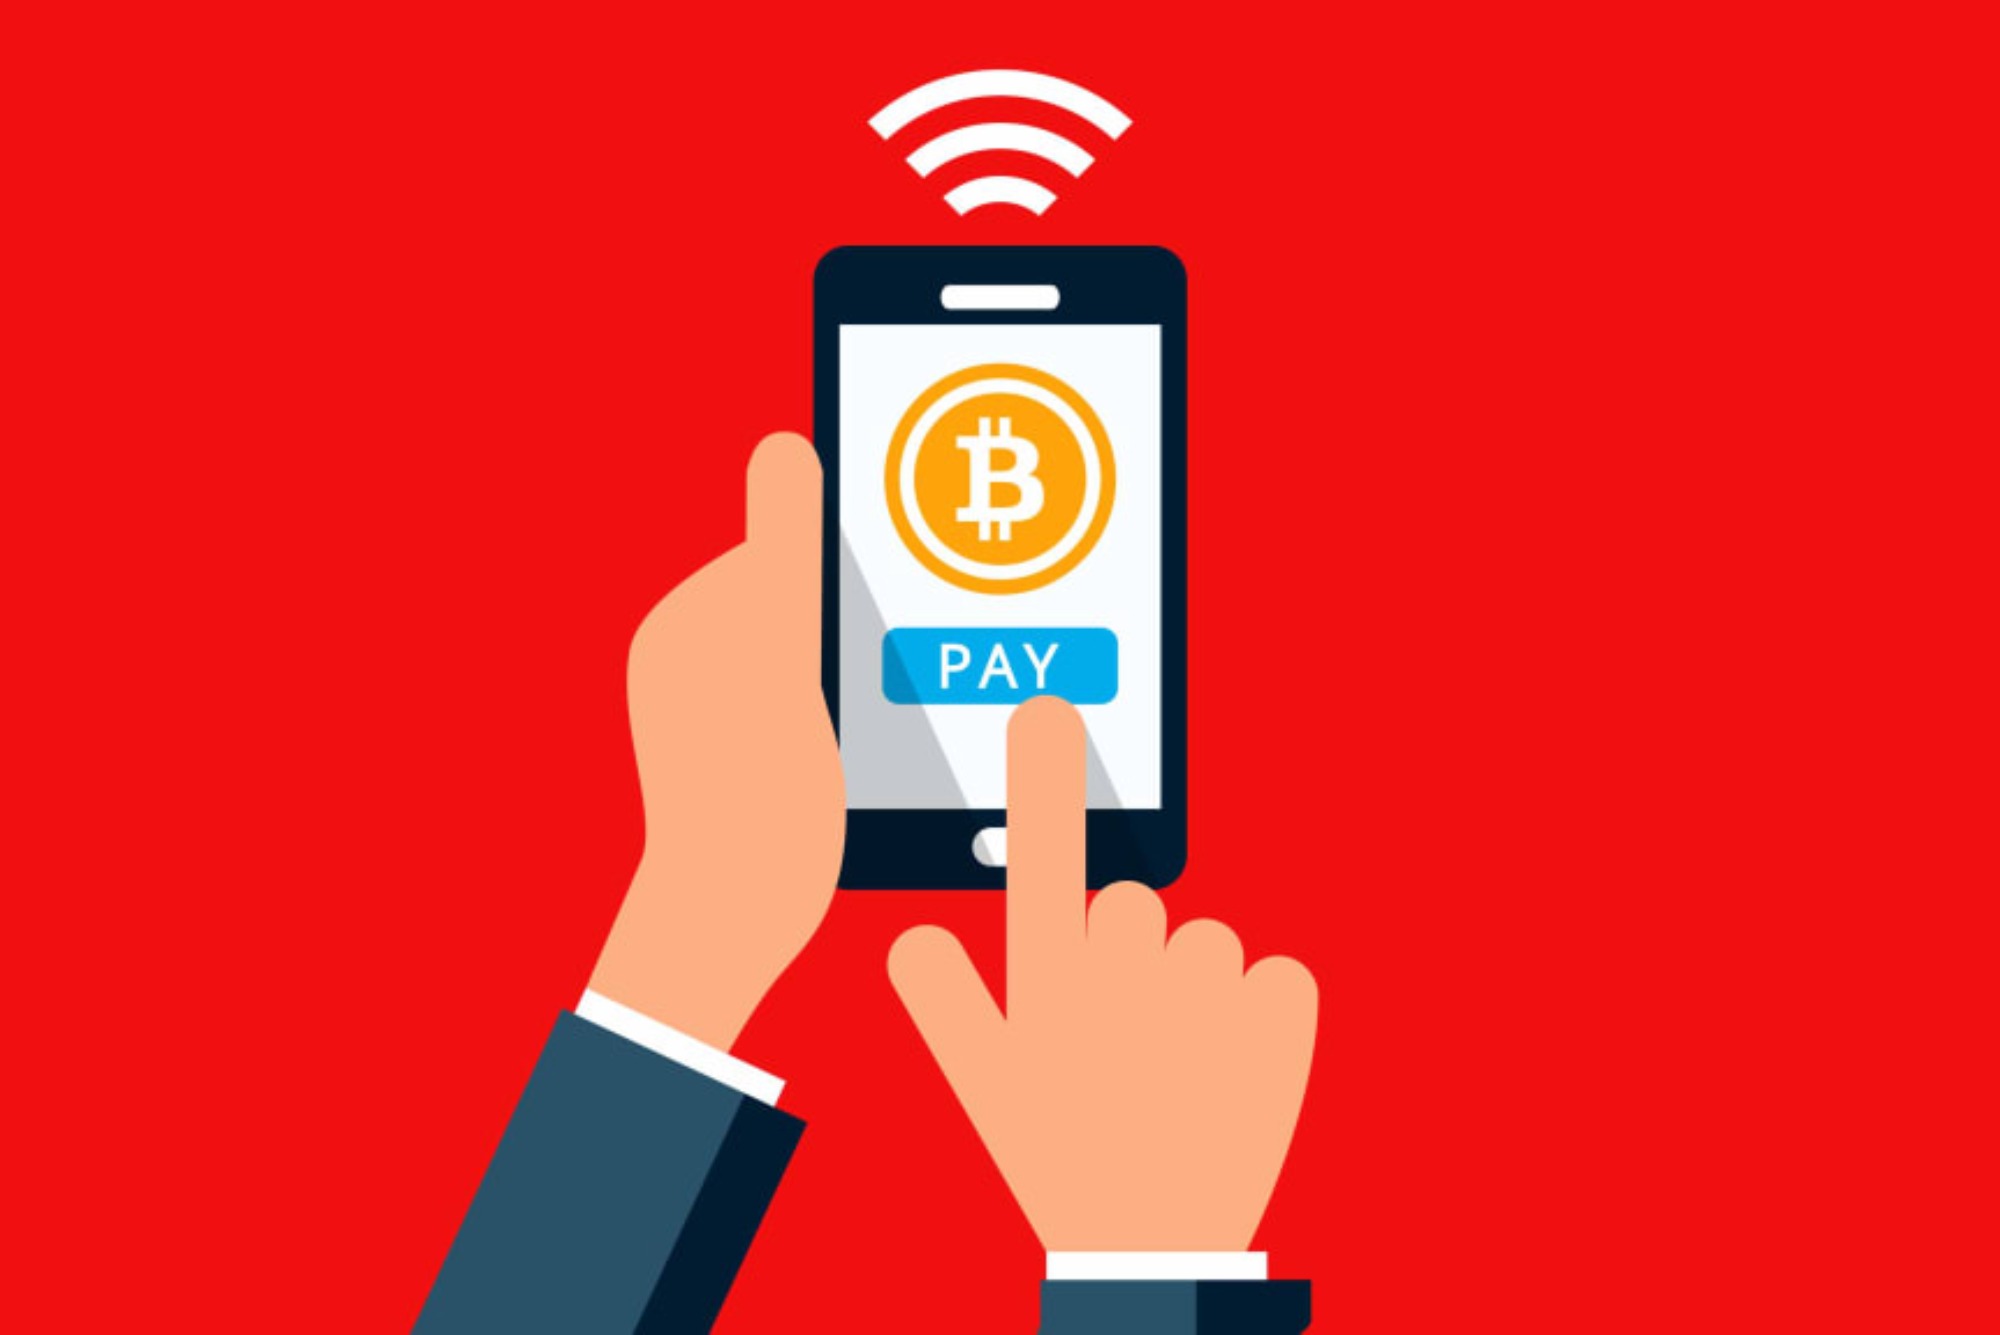 How to Pay in Cryptocurrency